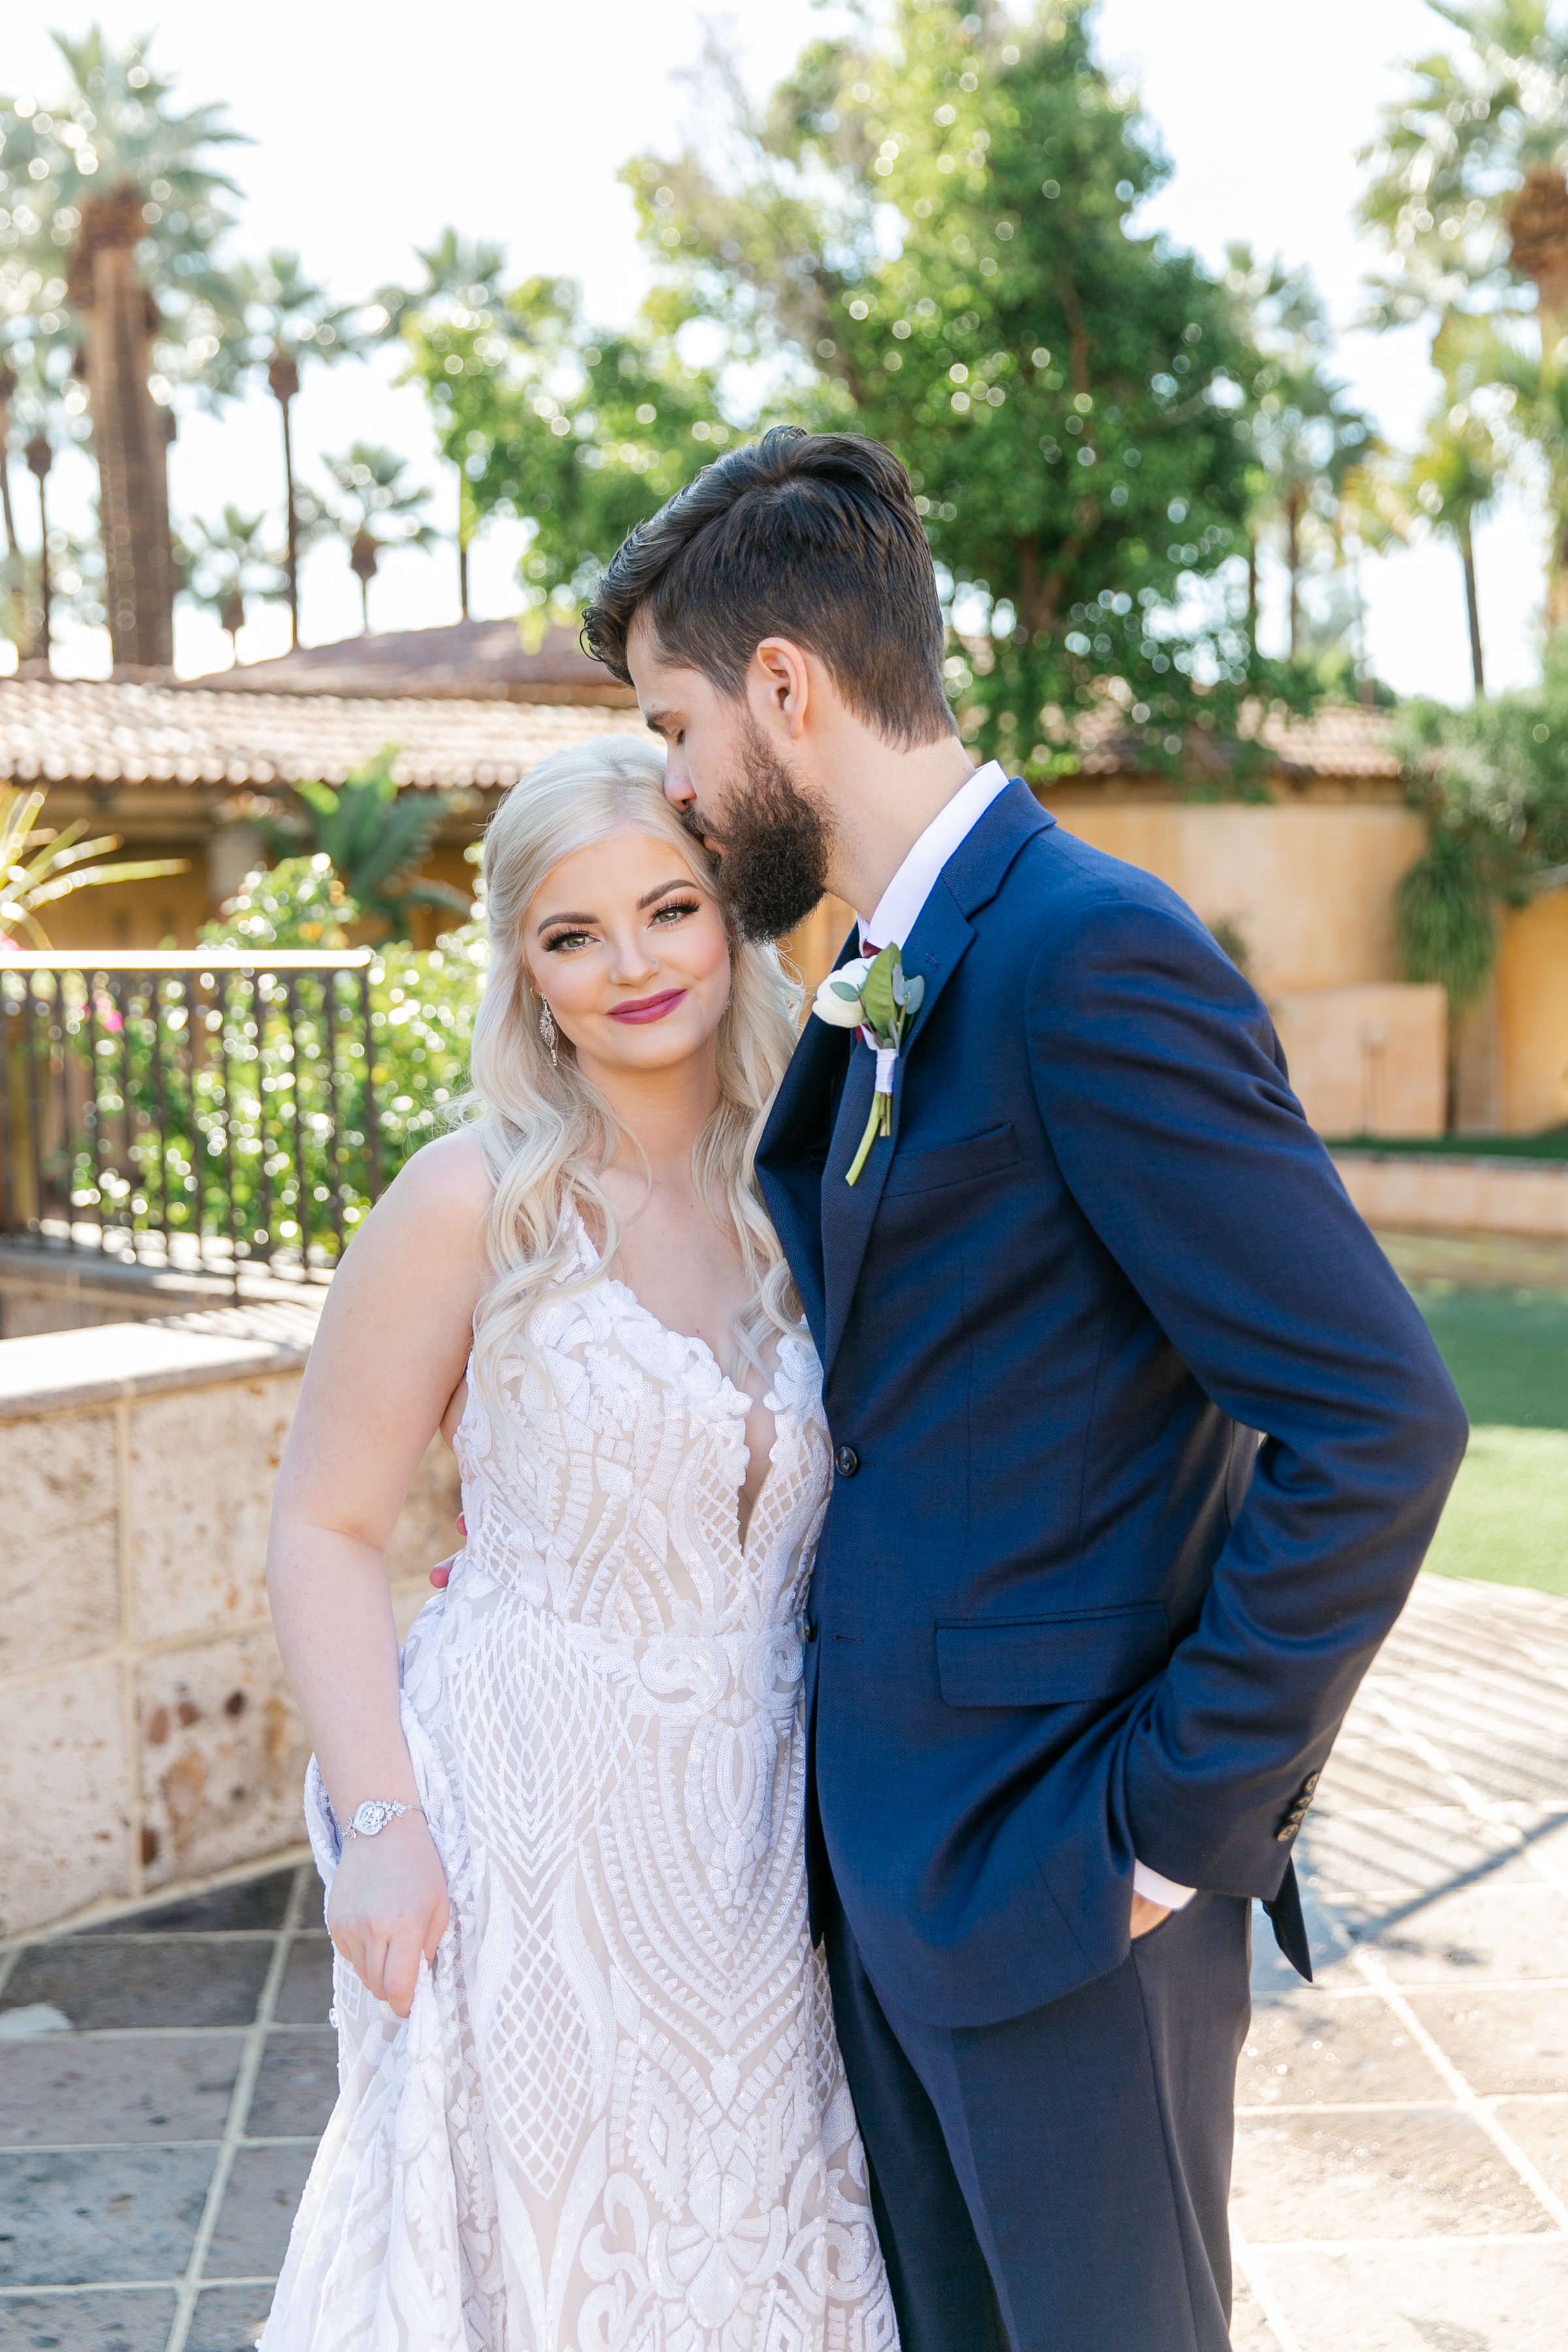 Karlie Colleen Photography - The Royal Palms Wedding - Some Like It Classic - Alex & Sam-125